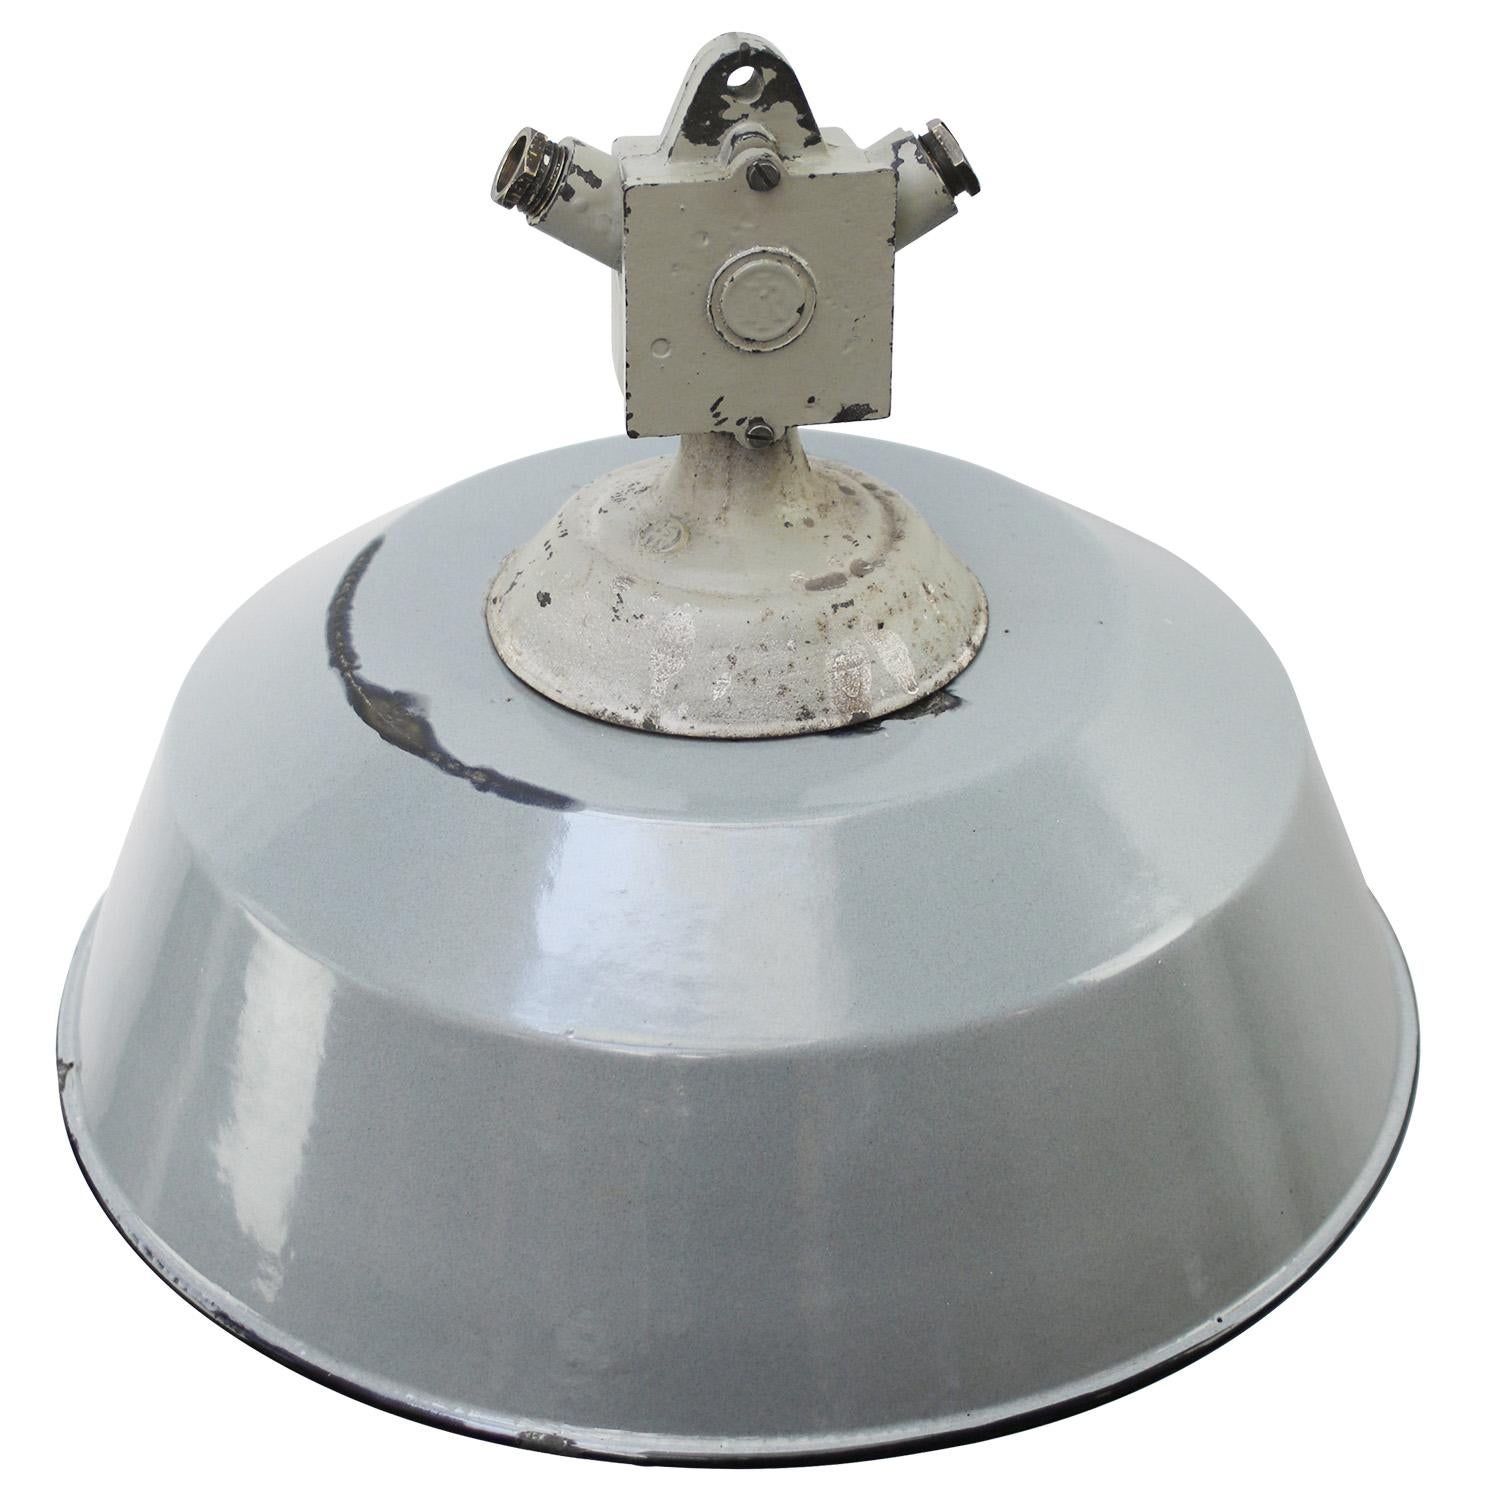 Rare and old factory lamp by Industria Rotterdam
Grey enamel with gray cast iron top
white interior

Weight: 5.50 kg / 12.1 lb

Priced per individual item. All lamps have been made suitable by international standards for incandescent light bulbs,